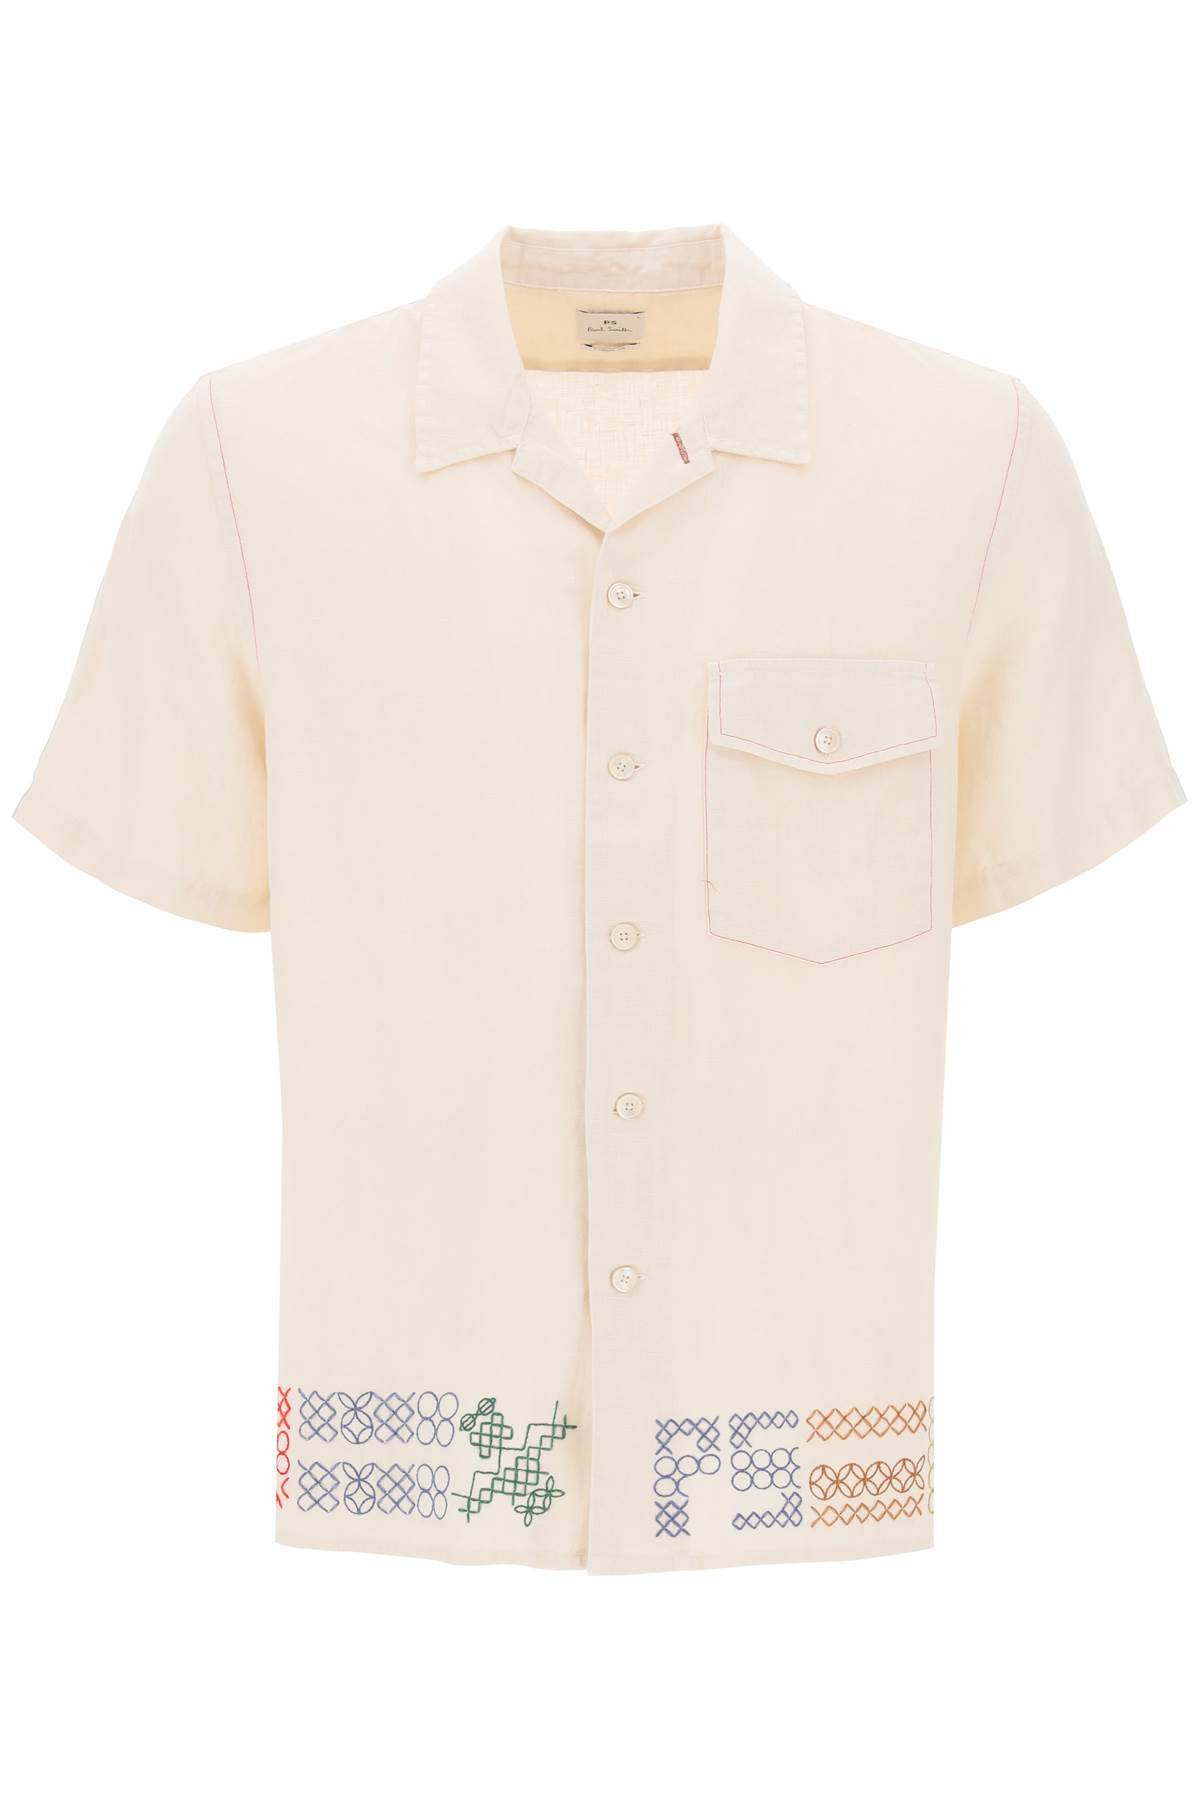 Shop Ps By Paul Smith Bowling Shirt With Cross-stitch Embroidery Details In Beige,neutro